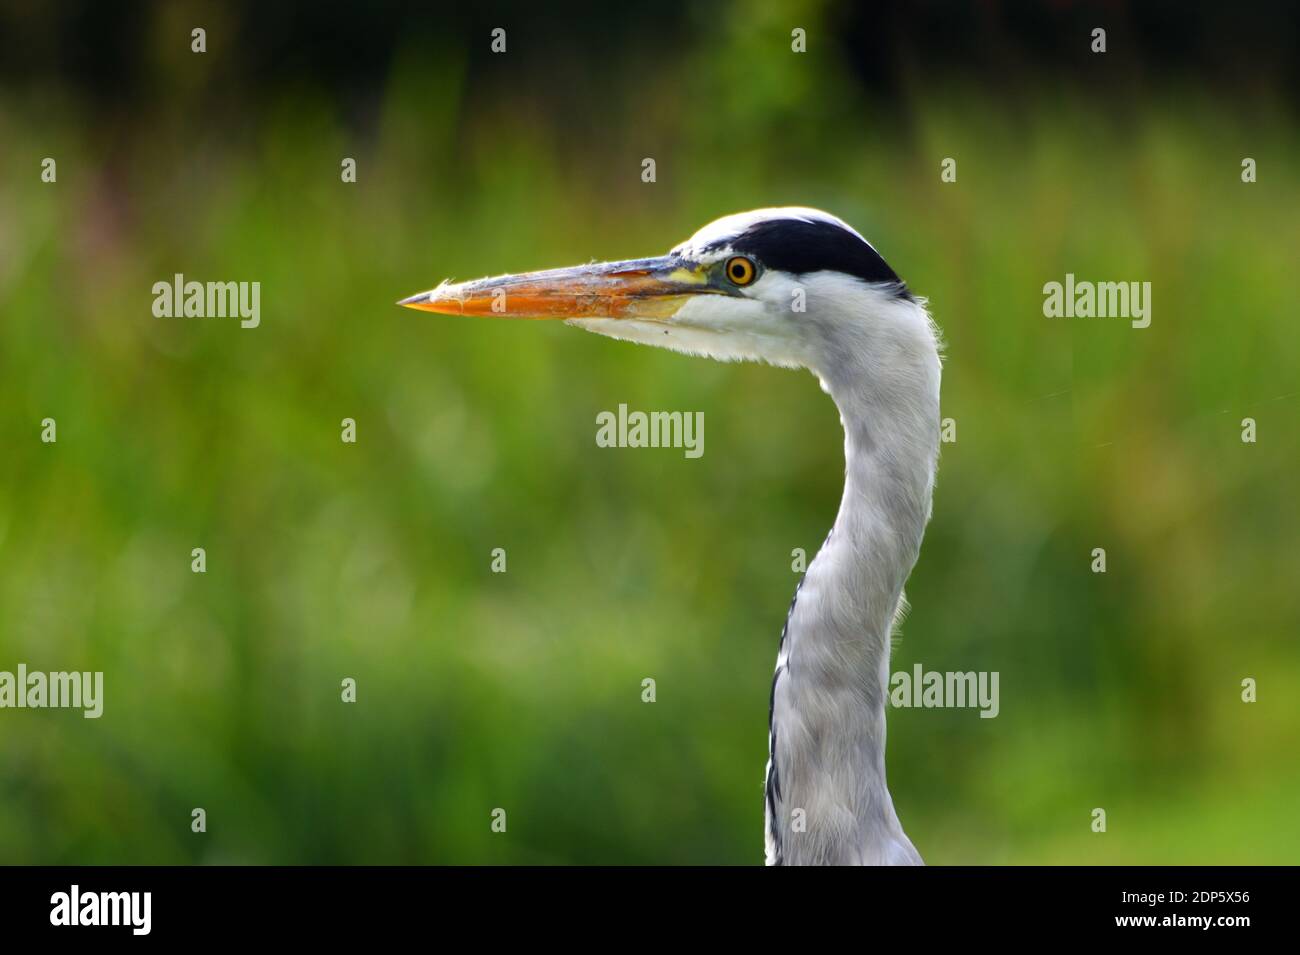 Close Up of Grey Heron head out of focus background Stock Photo